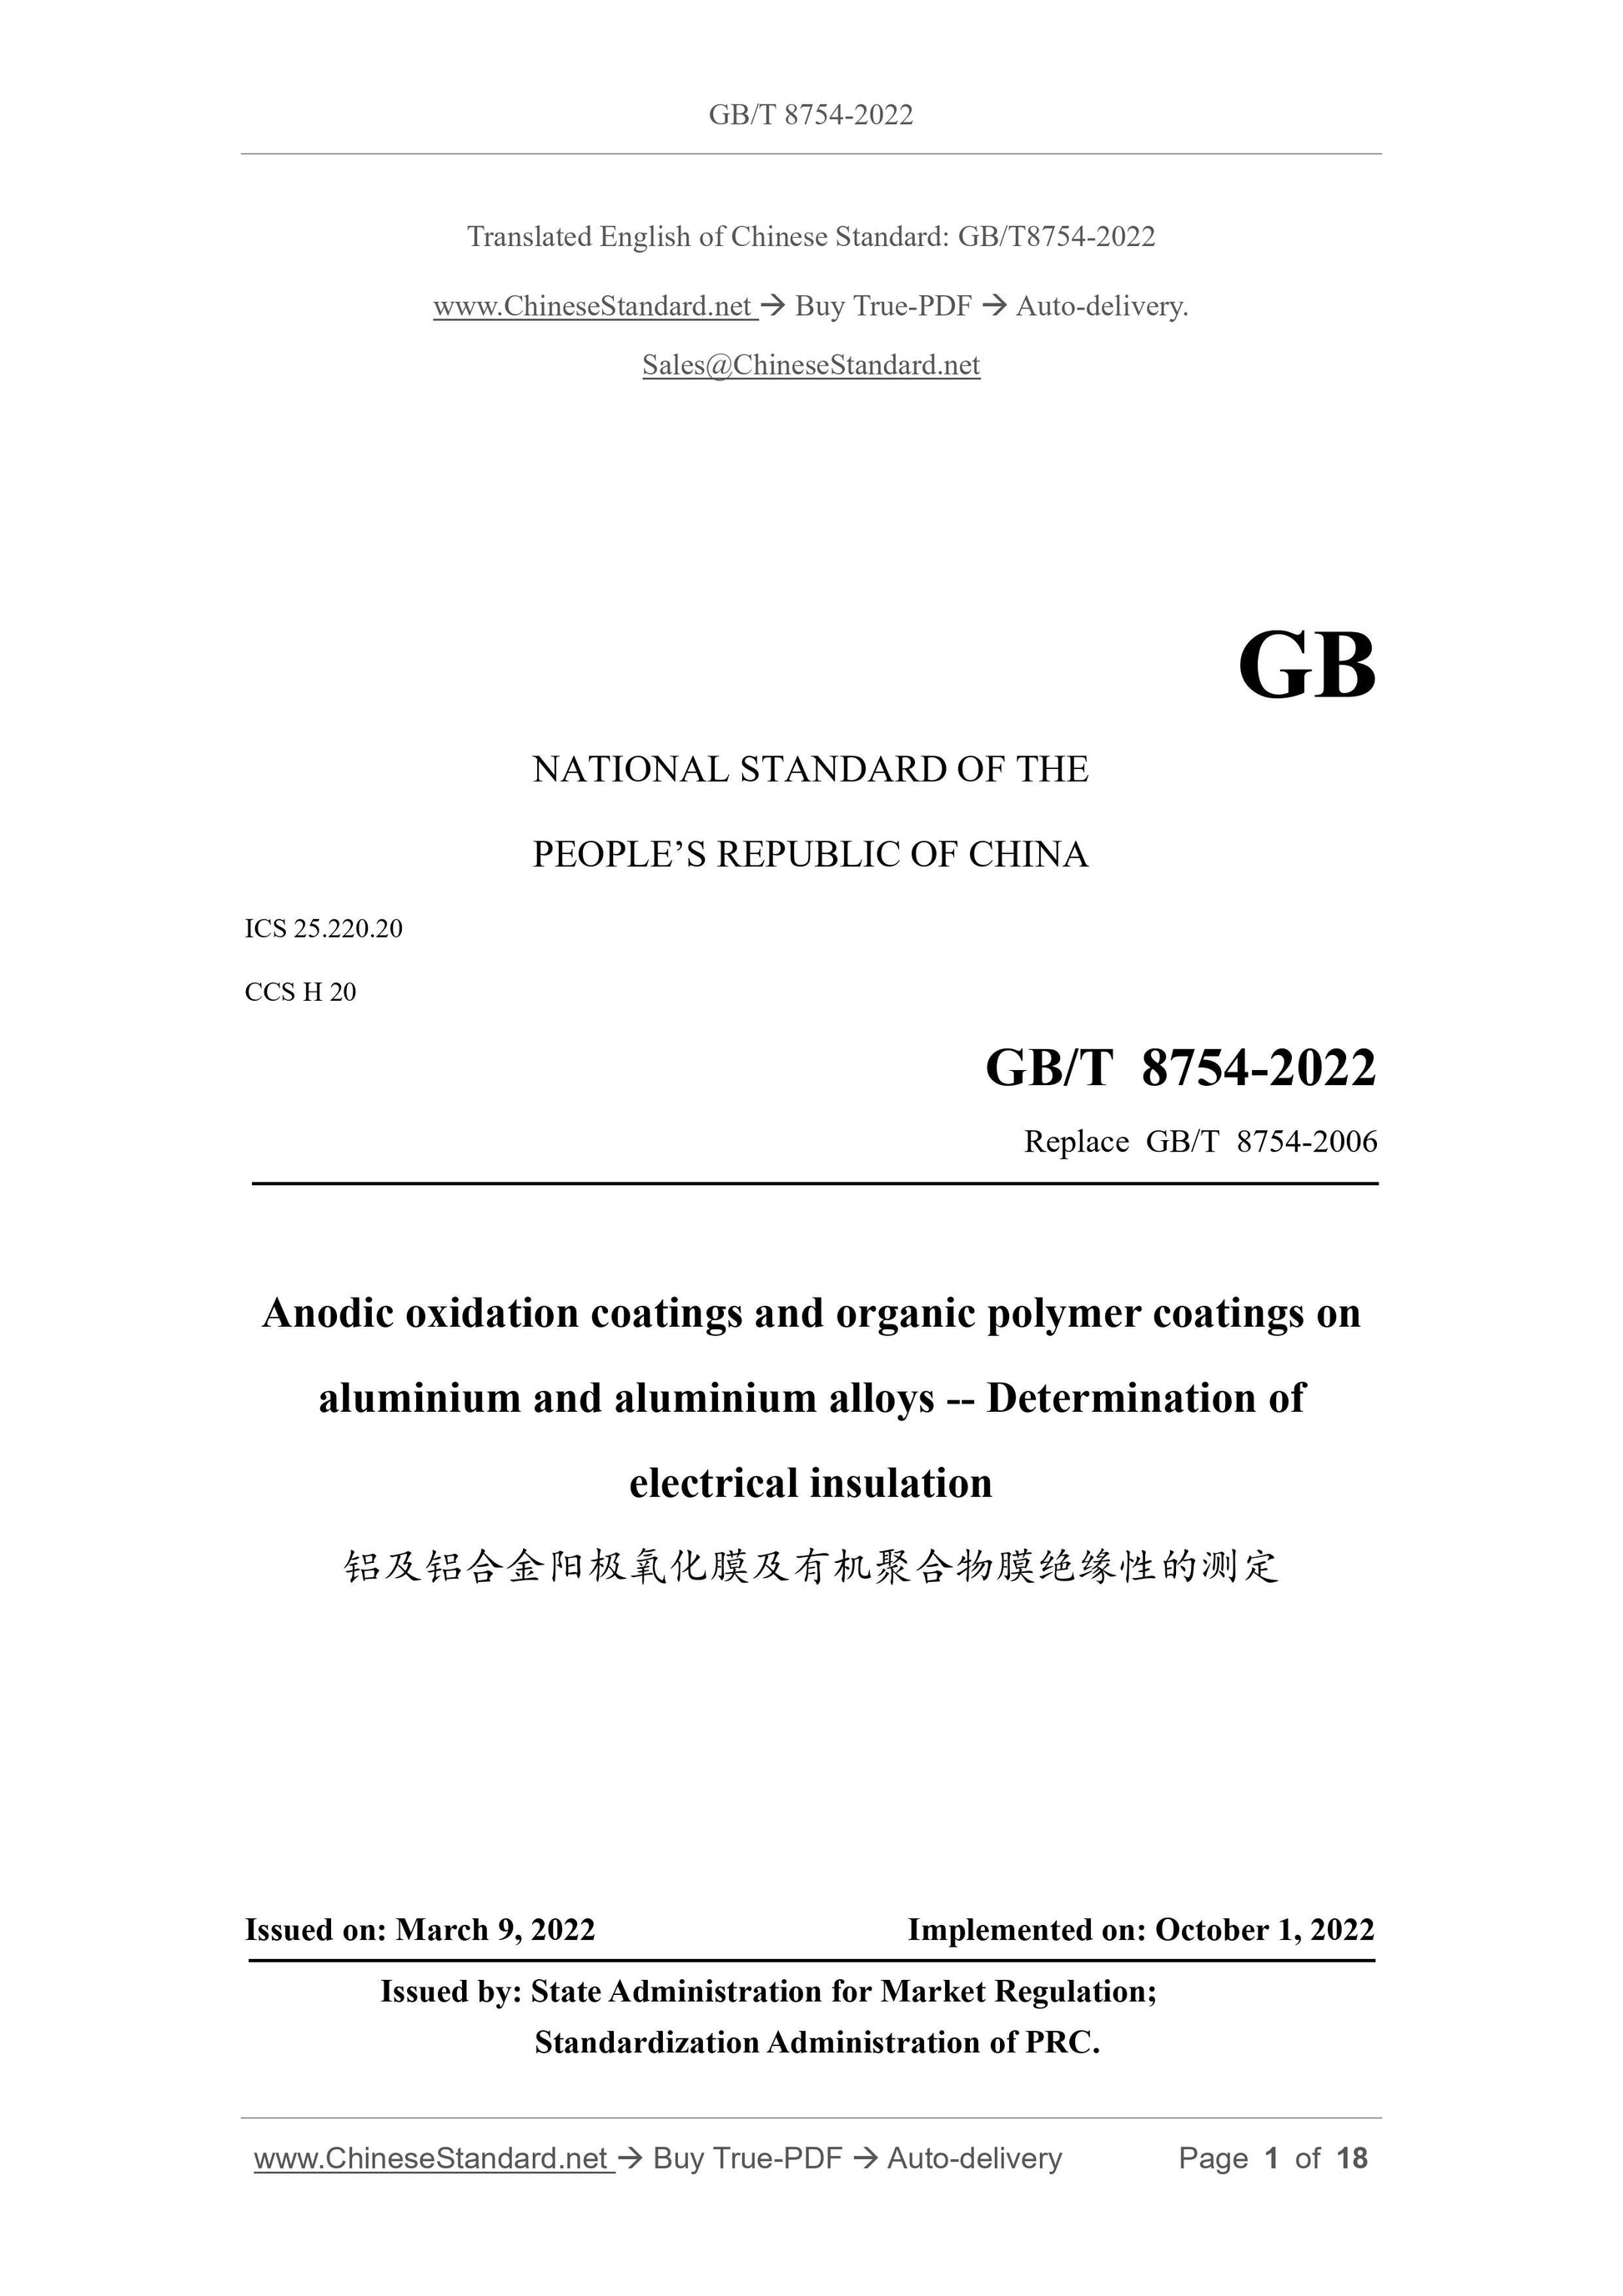 GB/T 8754-2022 Page 1